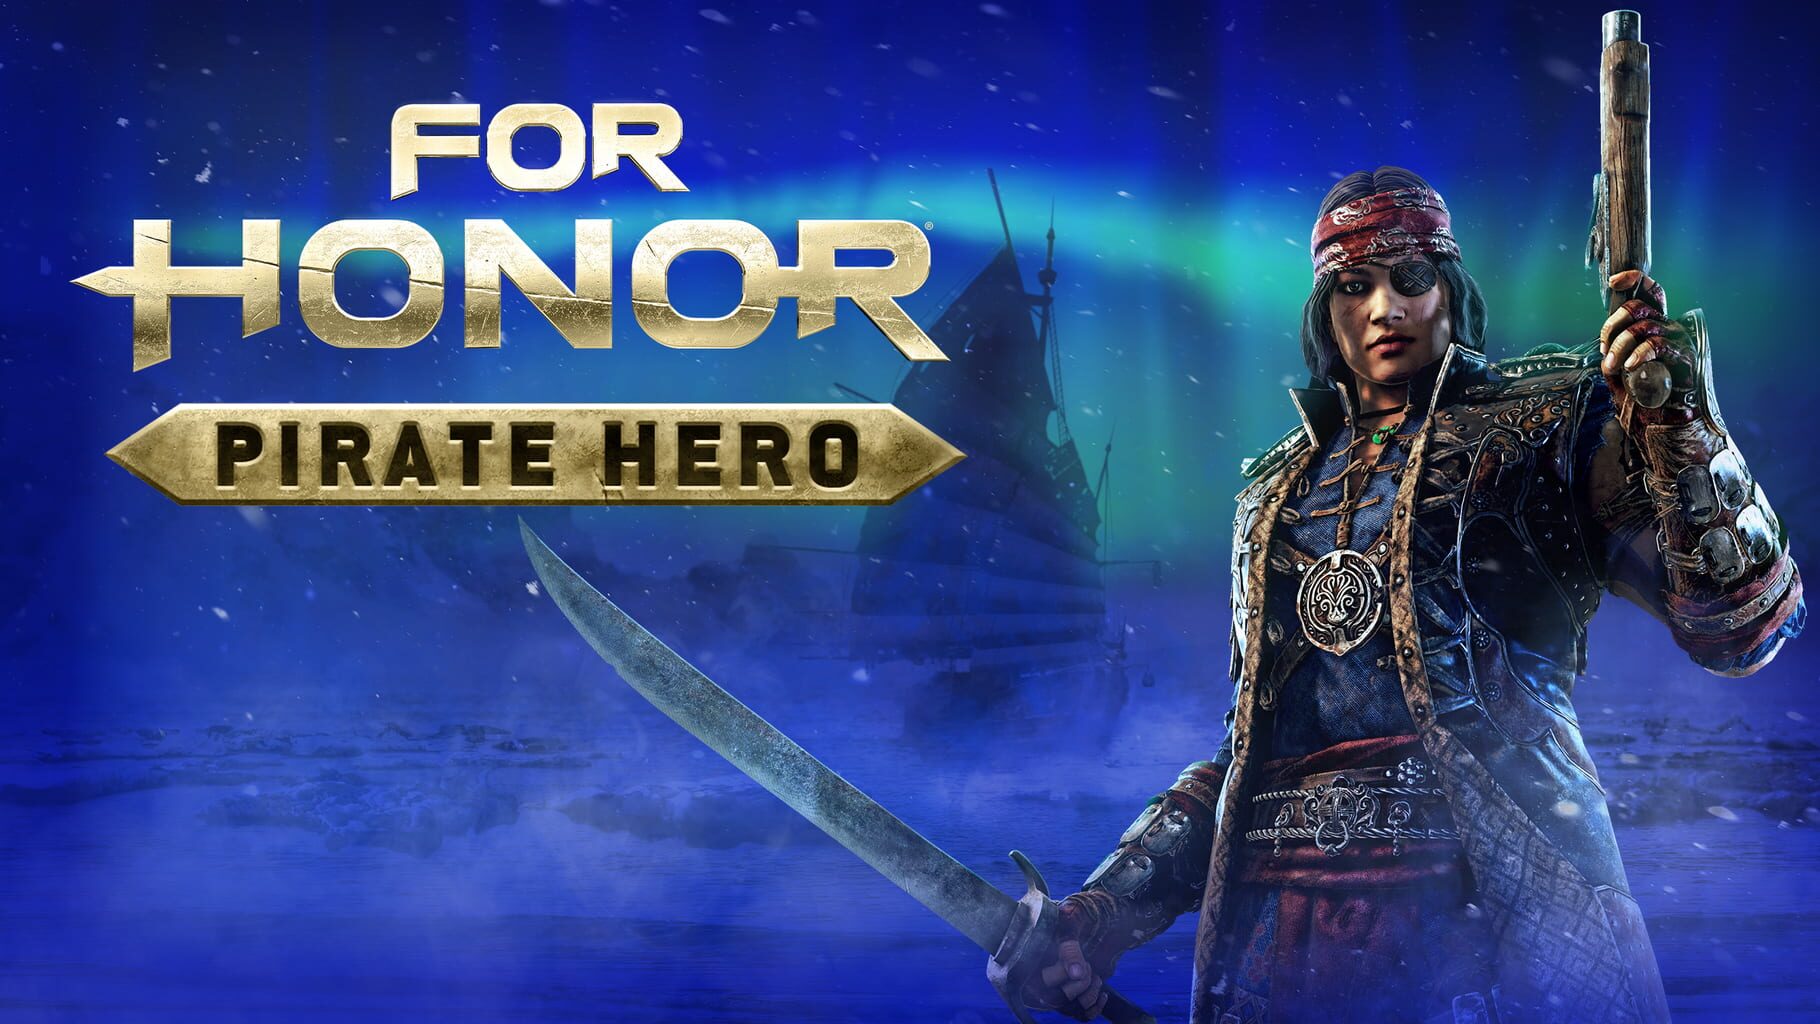 For Honor: Pirate Hero Image